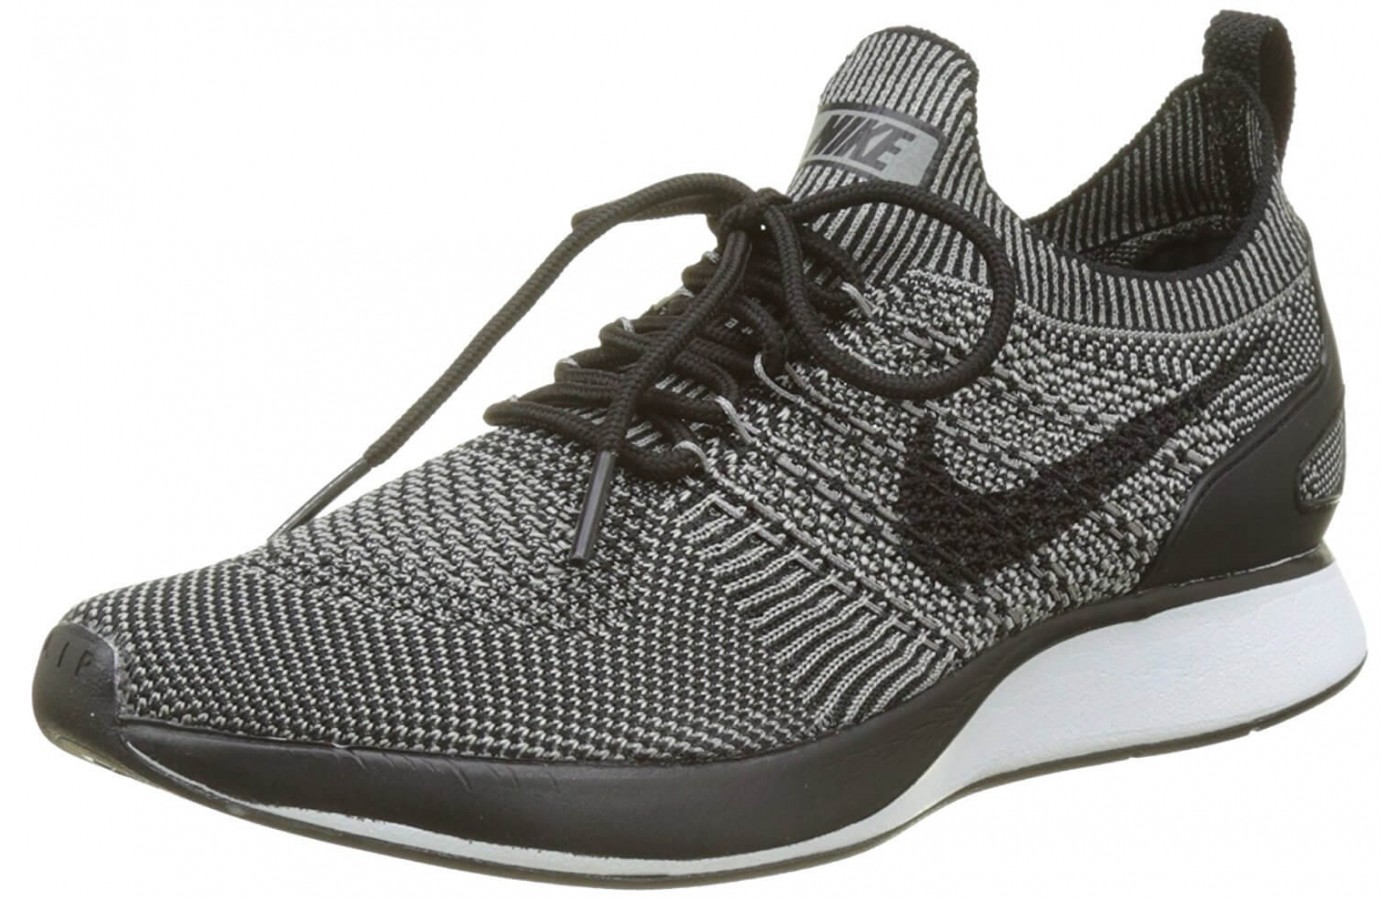 The Nike Air Zoom Mariah Flyknit Racer can be designed entirely by you!